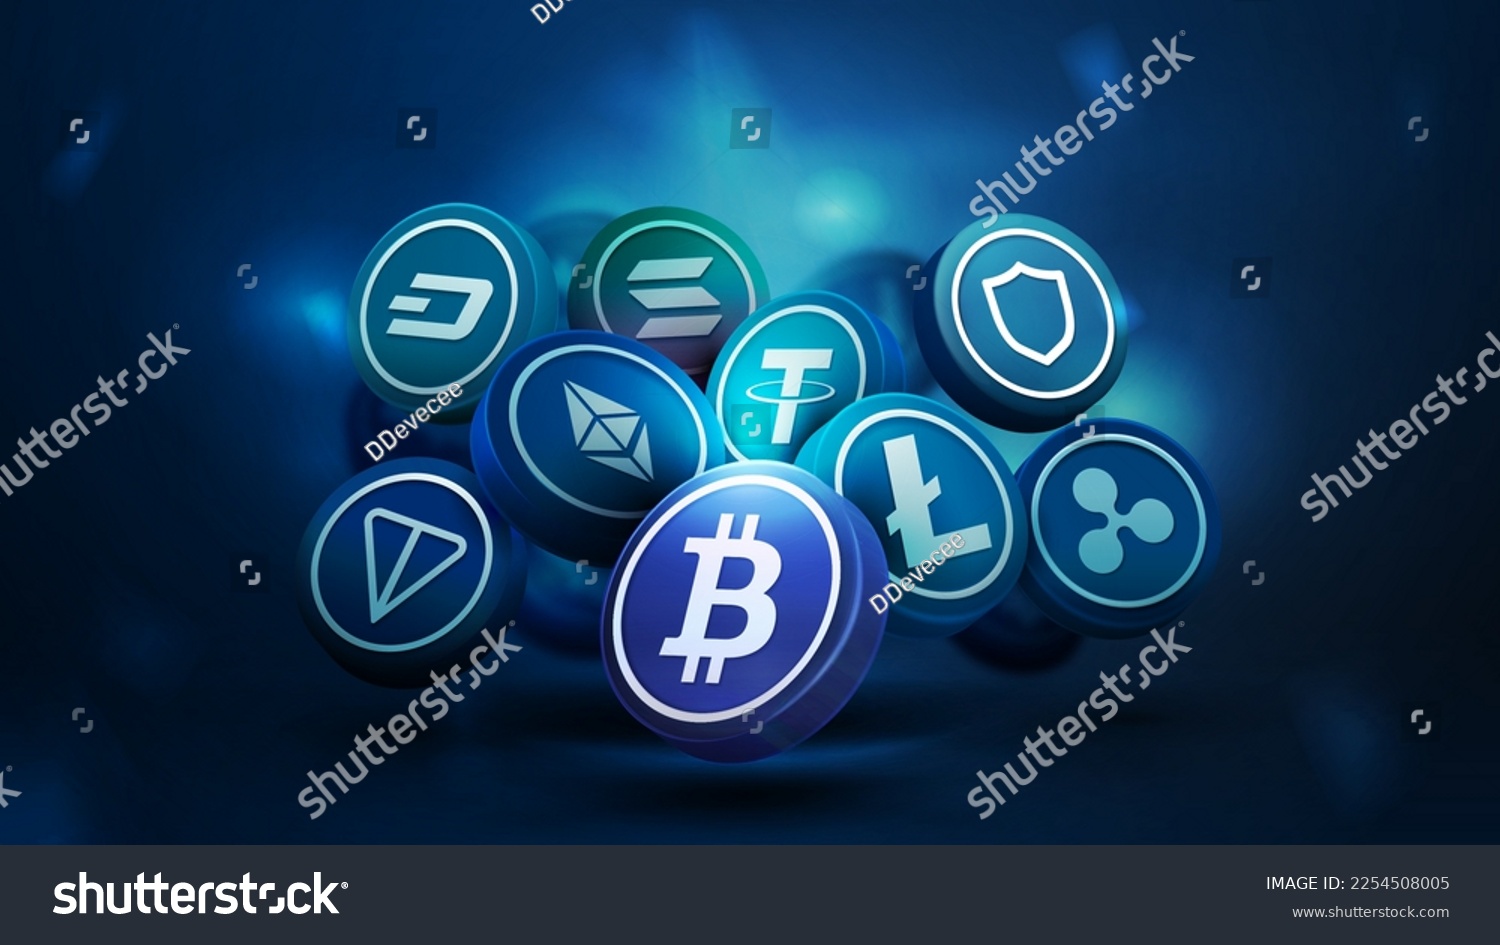 SVG of 3D cryptocurrency coins in dark blue scene. Bitcoin, Litecoin, Ethereum, Tether, Trust, Ton and Solana svg